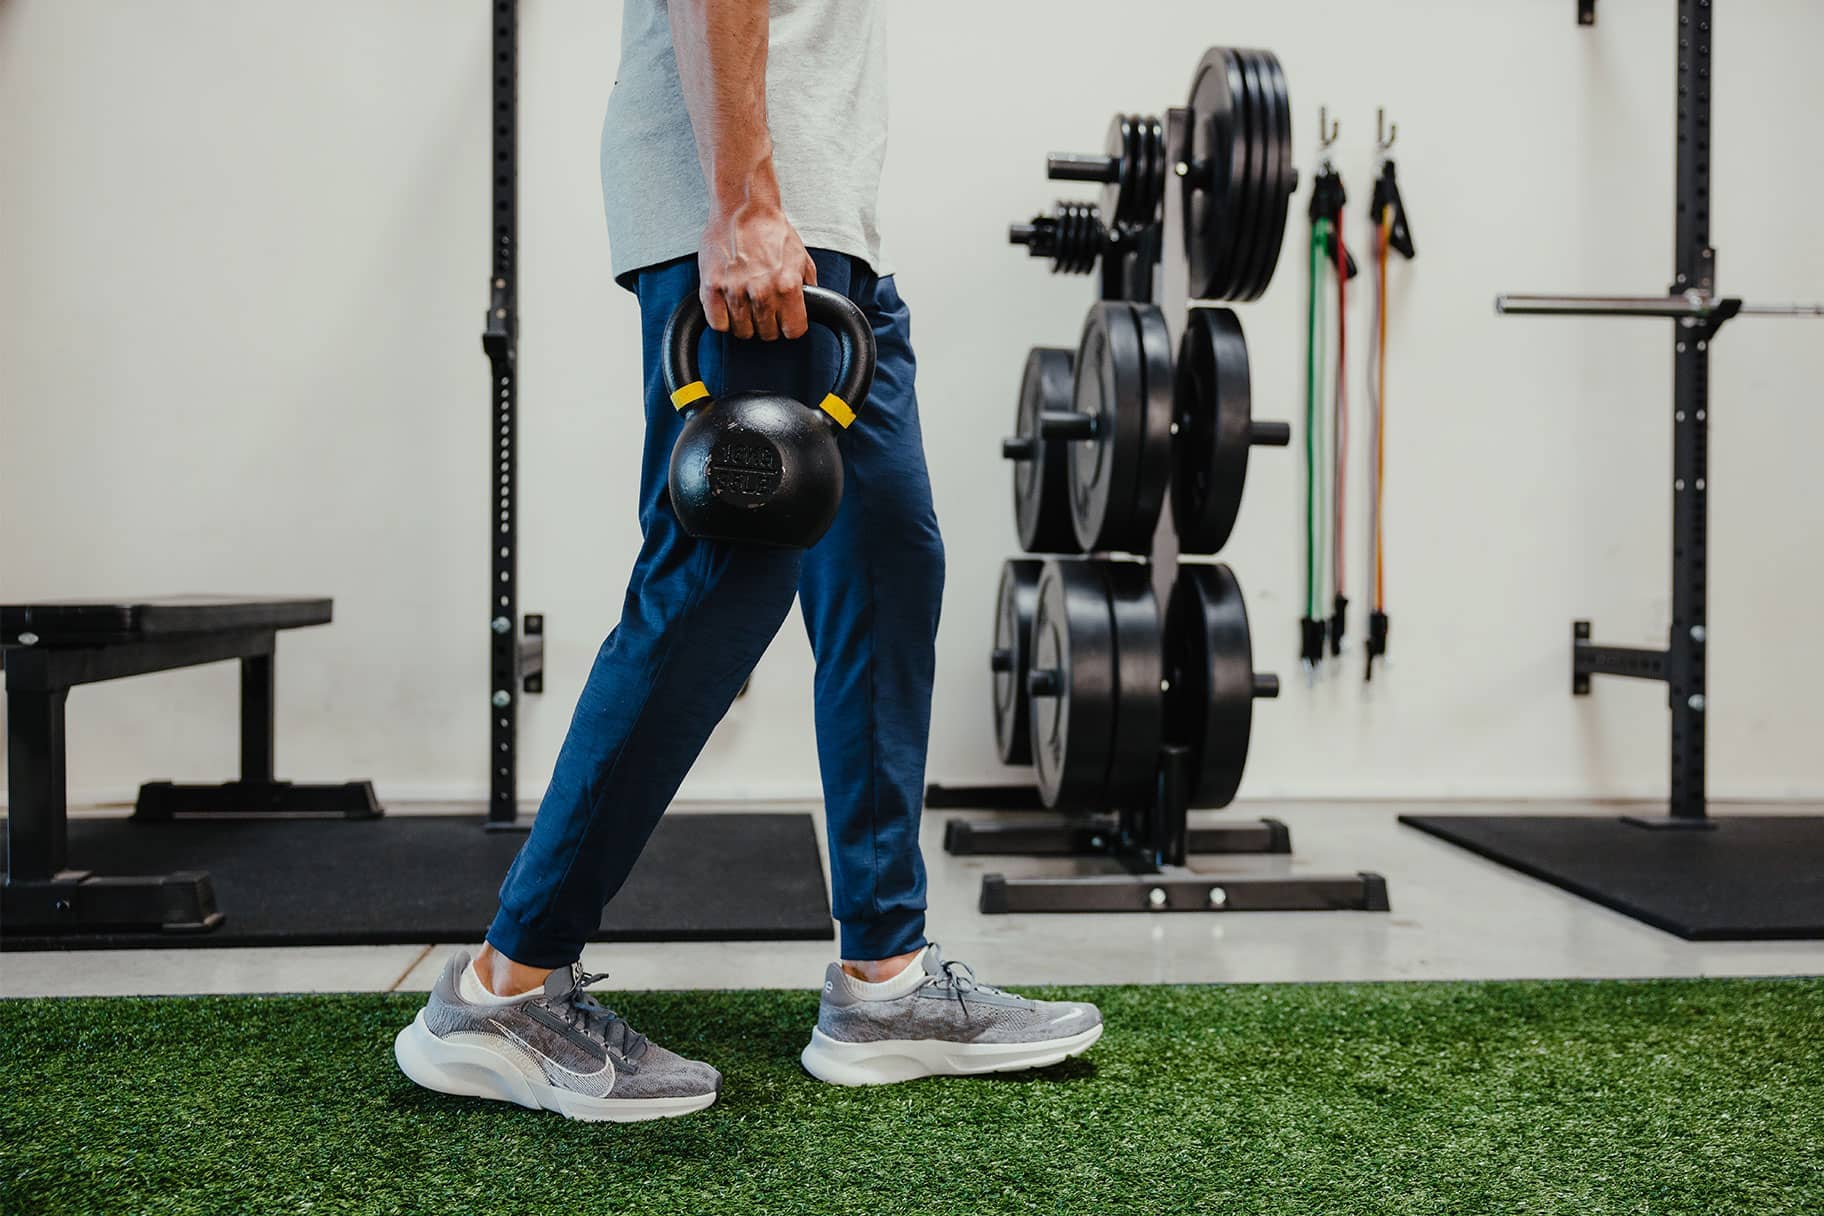 Try These Upright Row Variations, Experts Say.